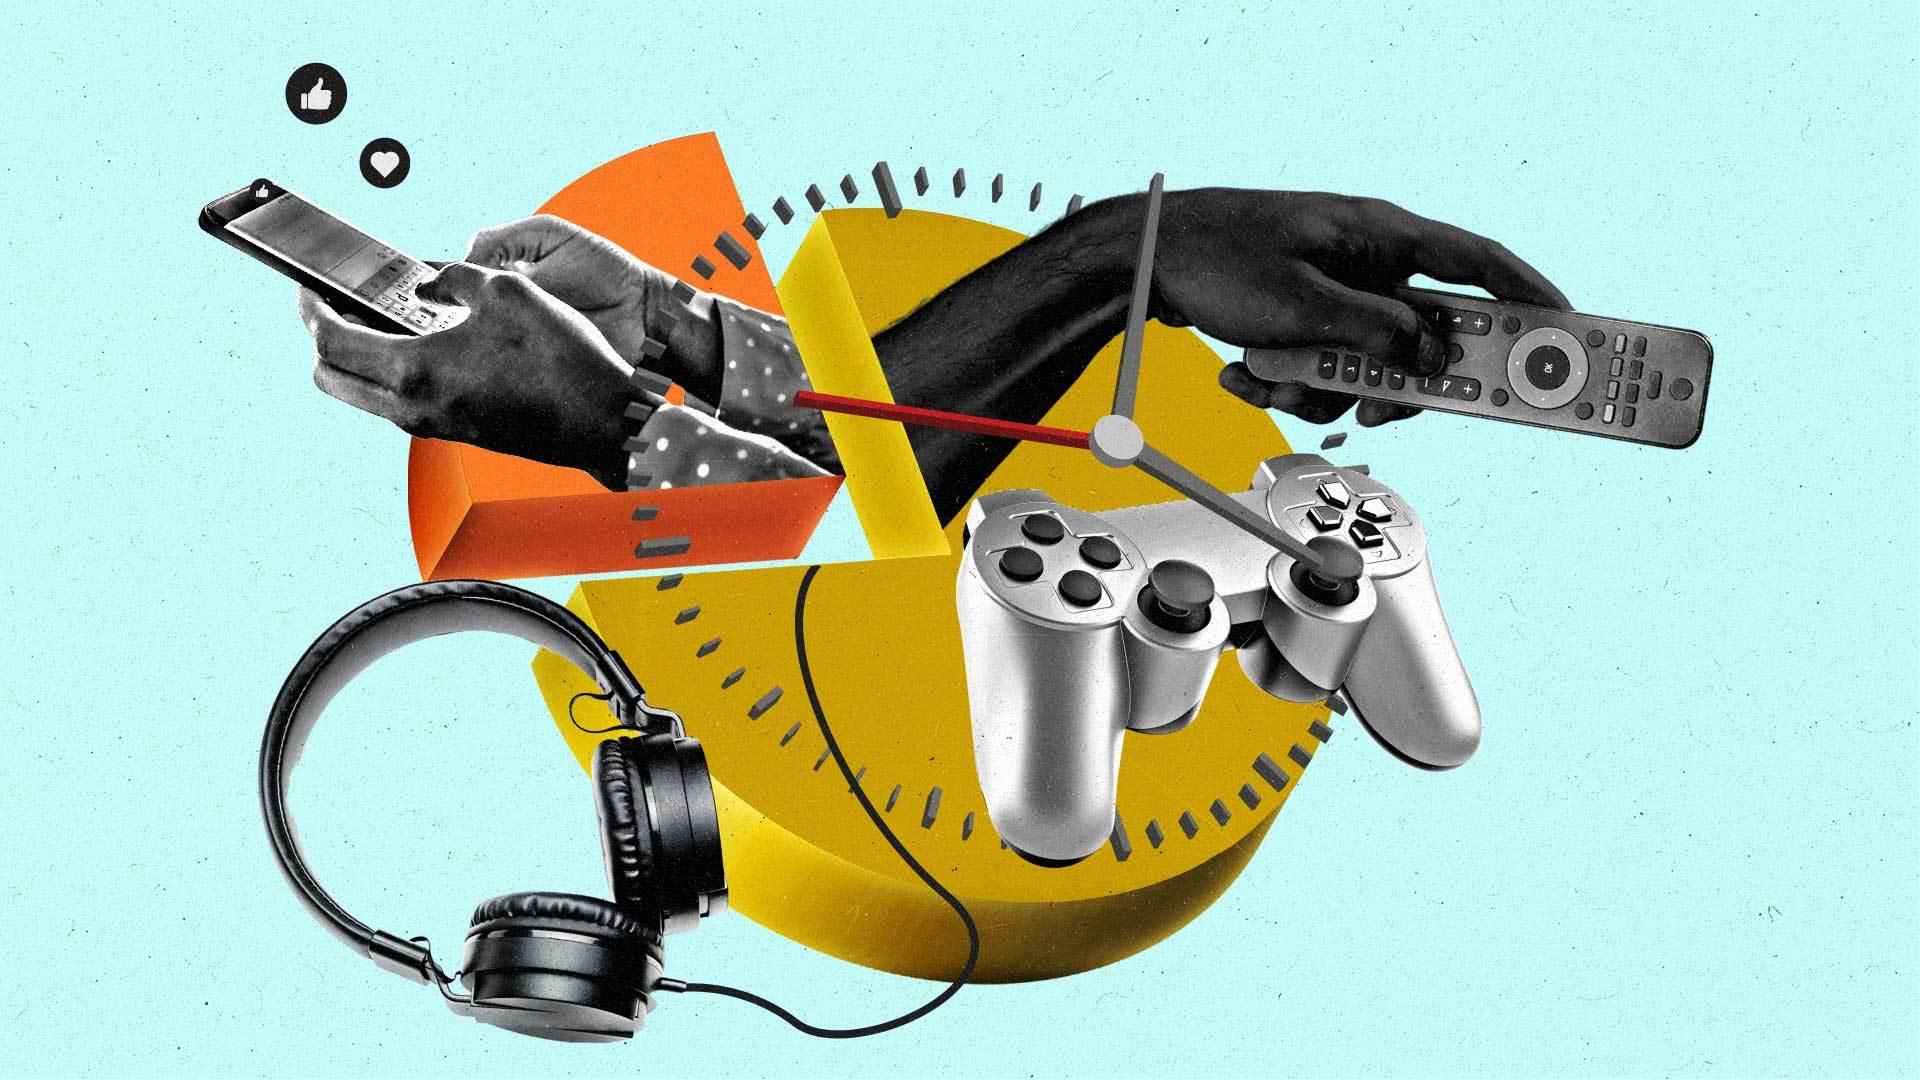 Clock face with headphones, video game controller, hand with remote and hand holding a phone.